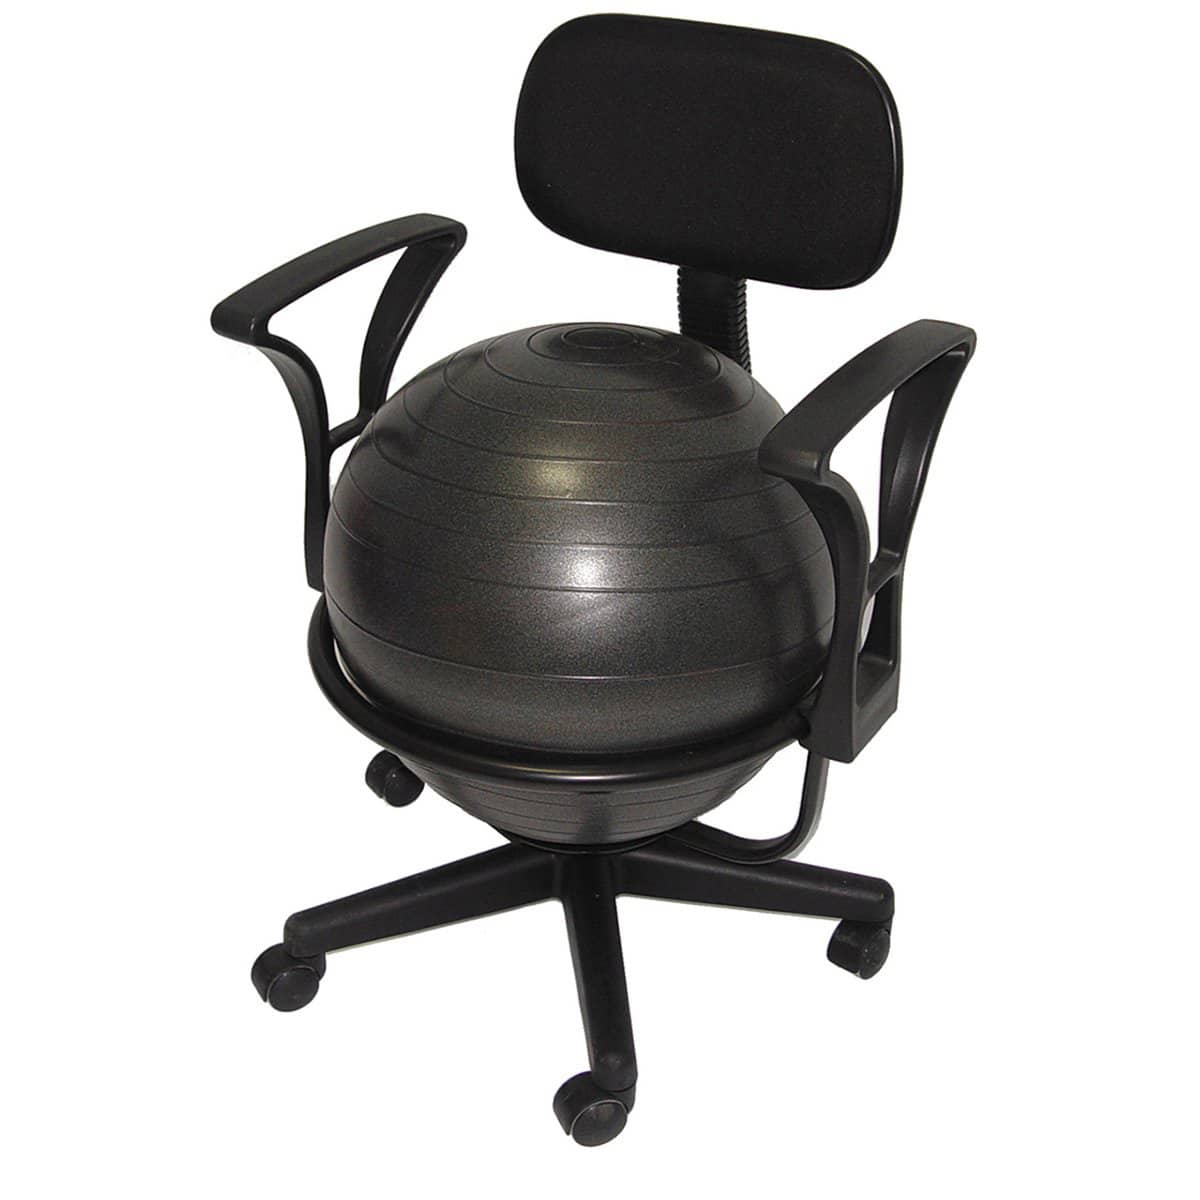 7. Deluxe Fitness Ball Chair Black 